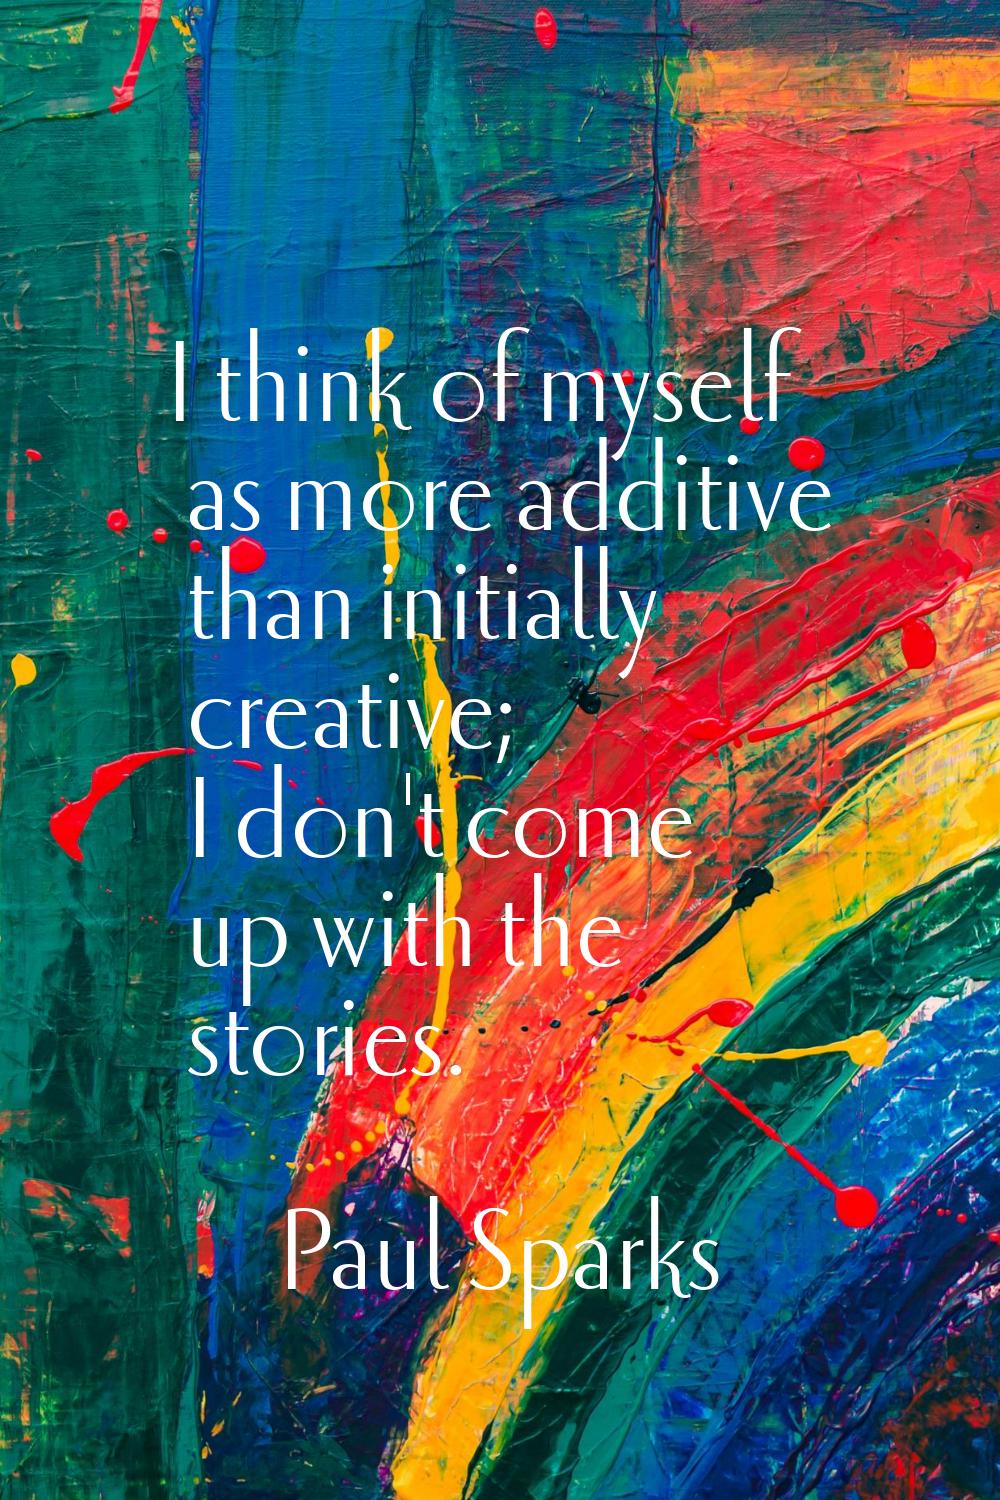 I think of myself as more additive than initially creative; I don't come up with the stories.